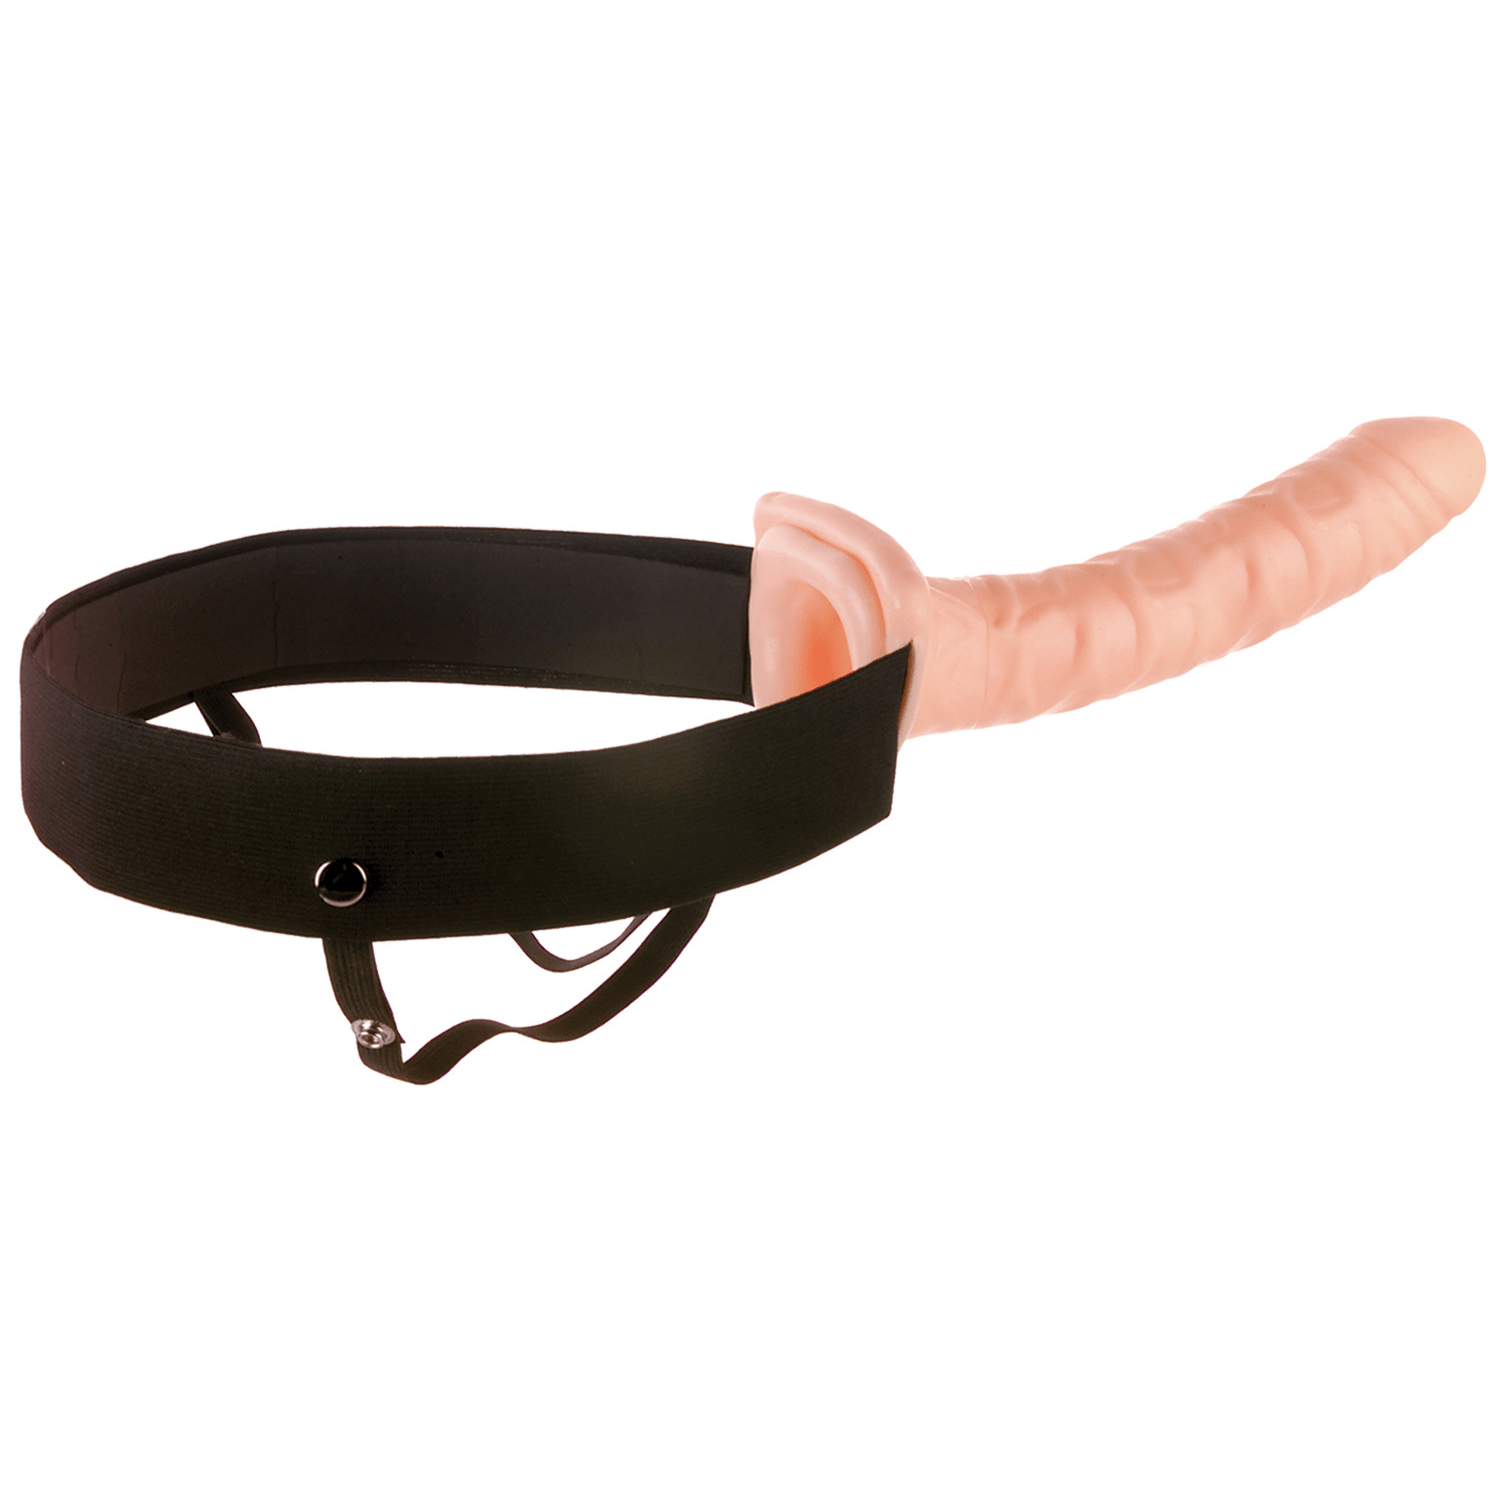 Pipedream - Fetish Fantasy Series Hollow Strap On 10" (Beige) Strap On with Hollow Dildo for Male (Non Vibration) 603912286632 CherryAffairs